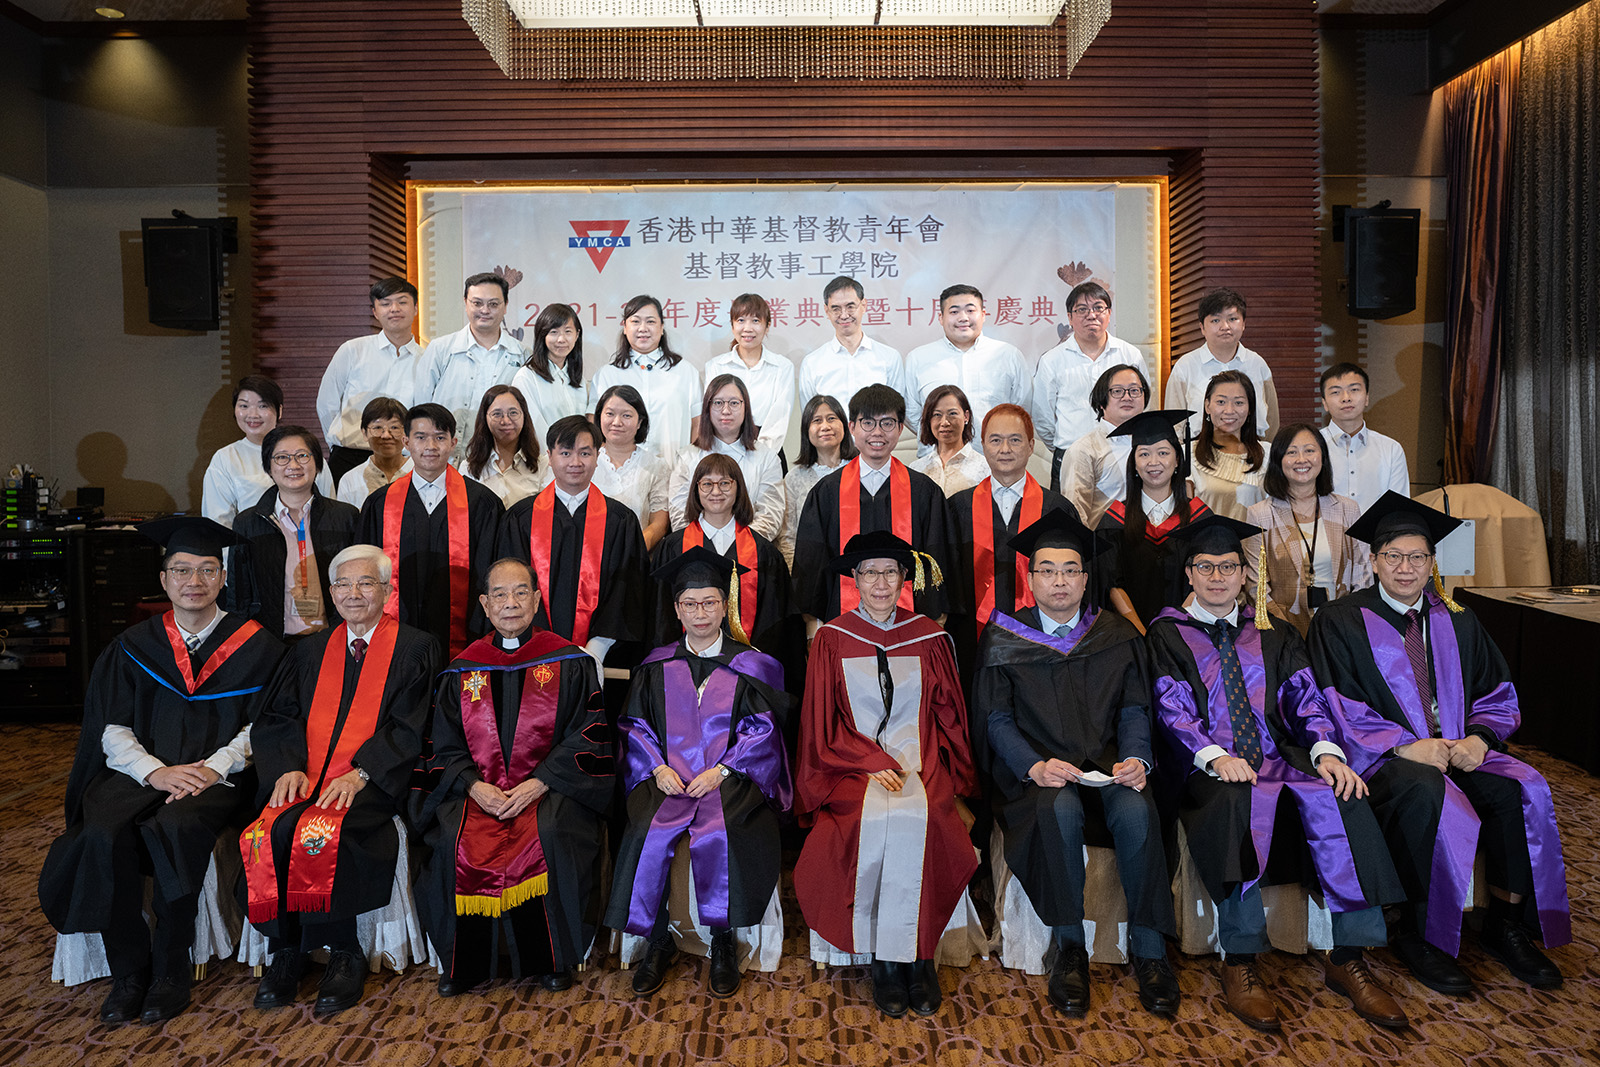 2021-2022 Graduation Ceremony of the Institute of Christian Ministry